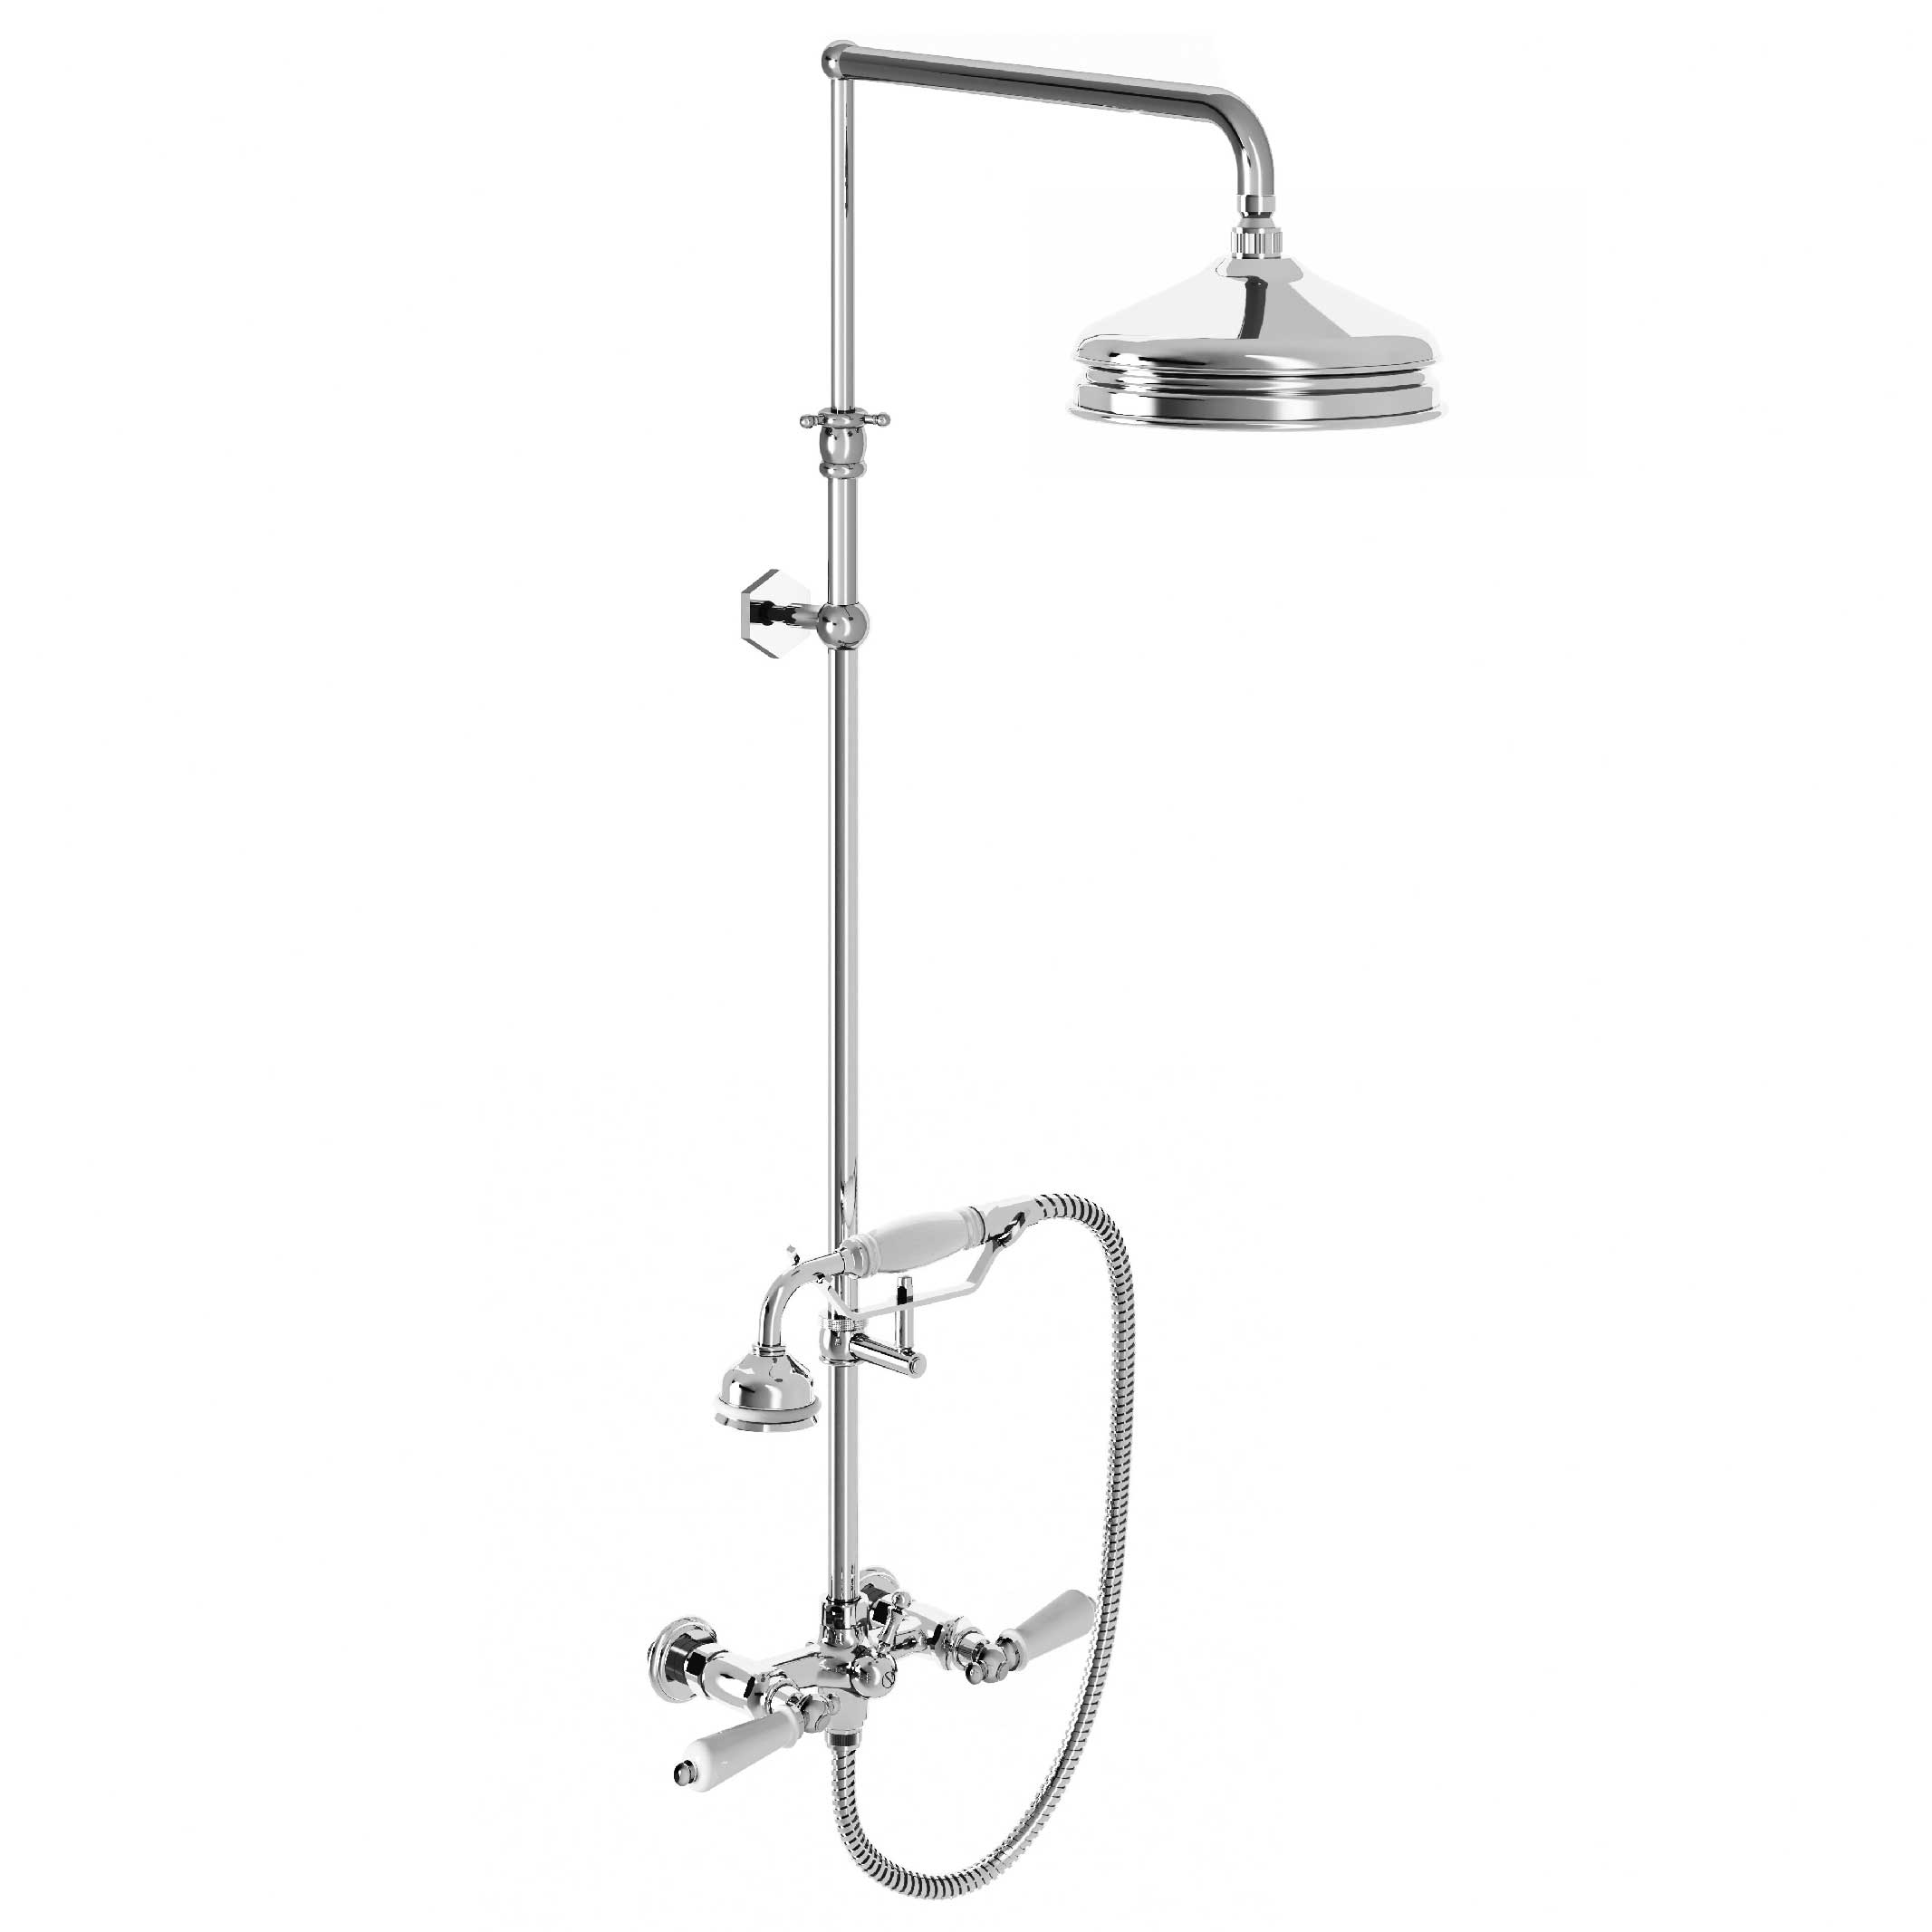 M32-2204 Shower mixer with column, anti-scaling